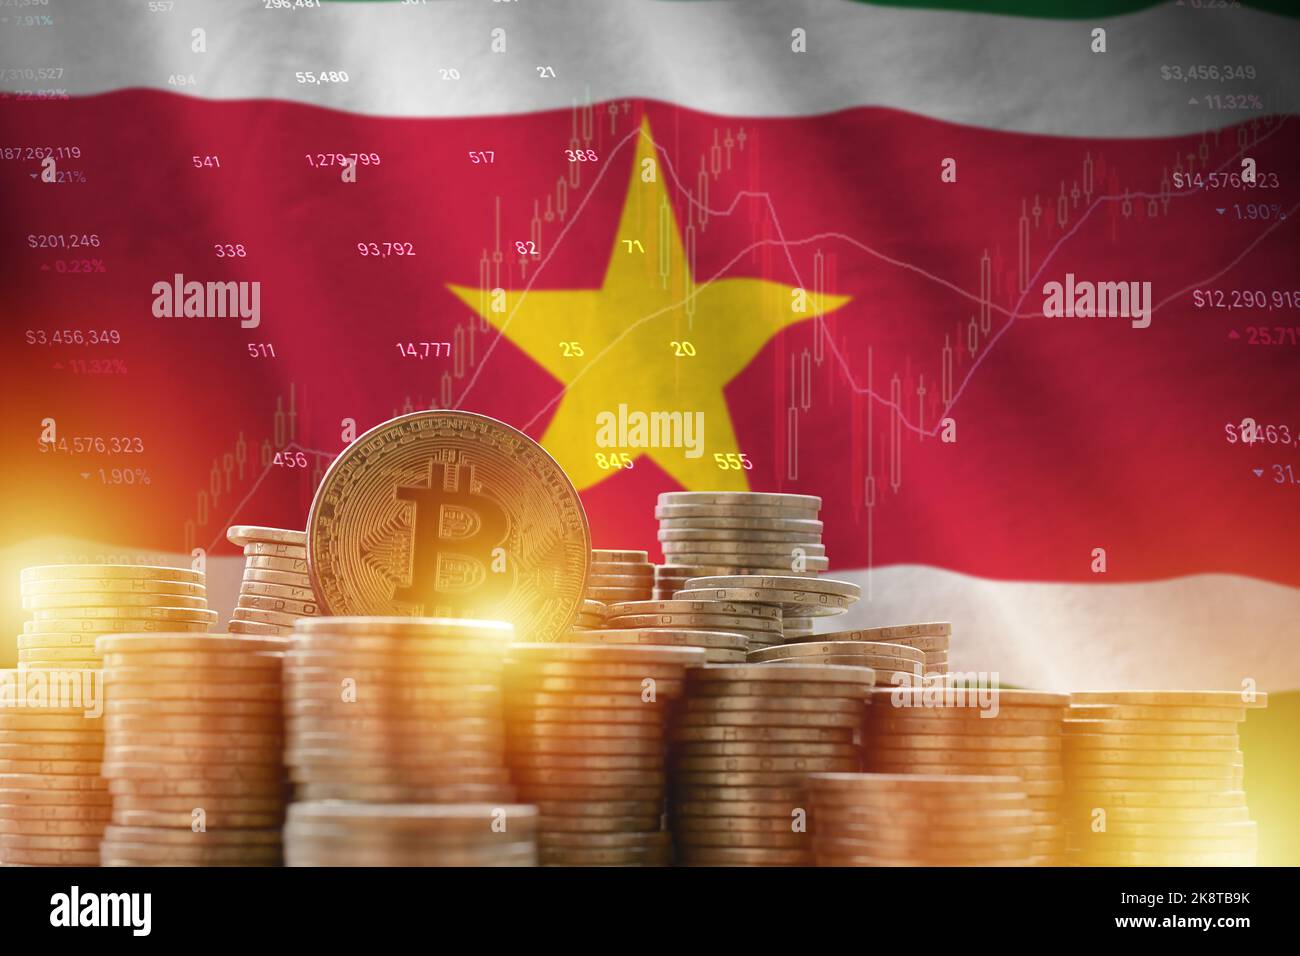 Suriname flag and big amount of golden bitcoin coins and trading platform chart. Crypto currency concept Stock Photo